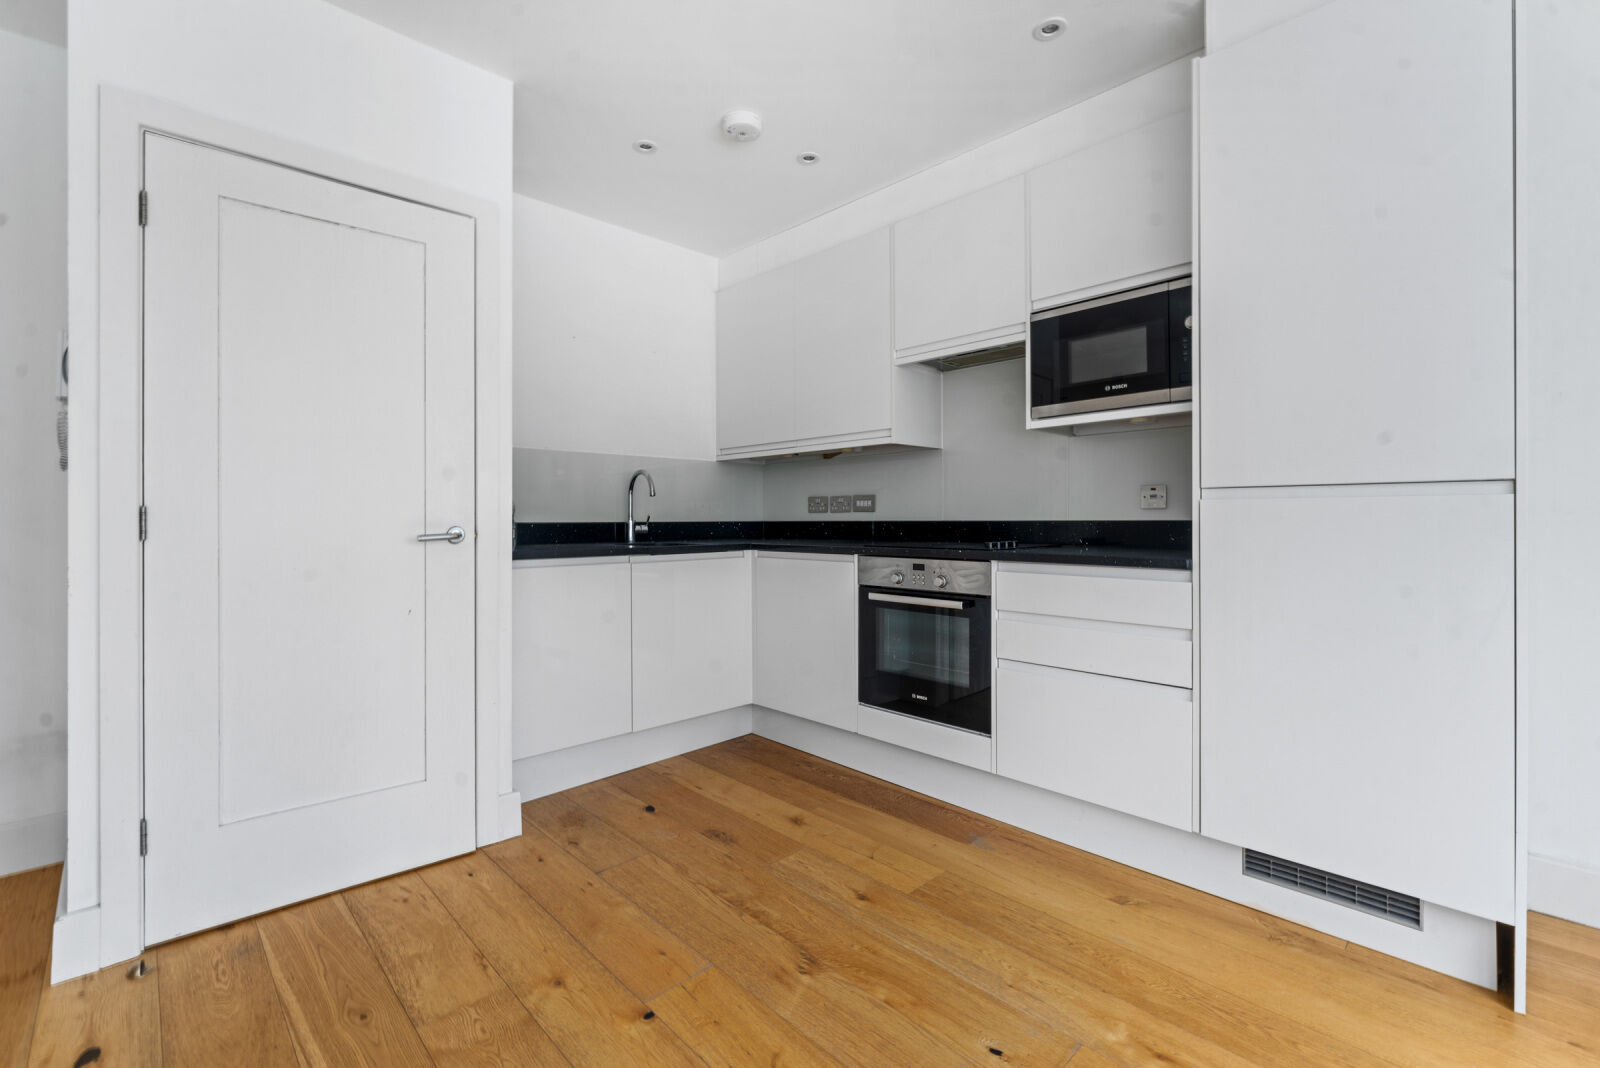 1 bedroom  flat to rent, Available now High Street, Croydon, CR0, main image